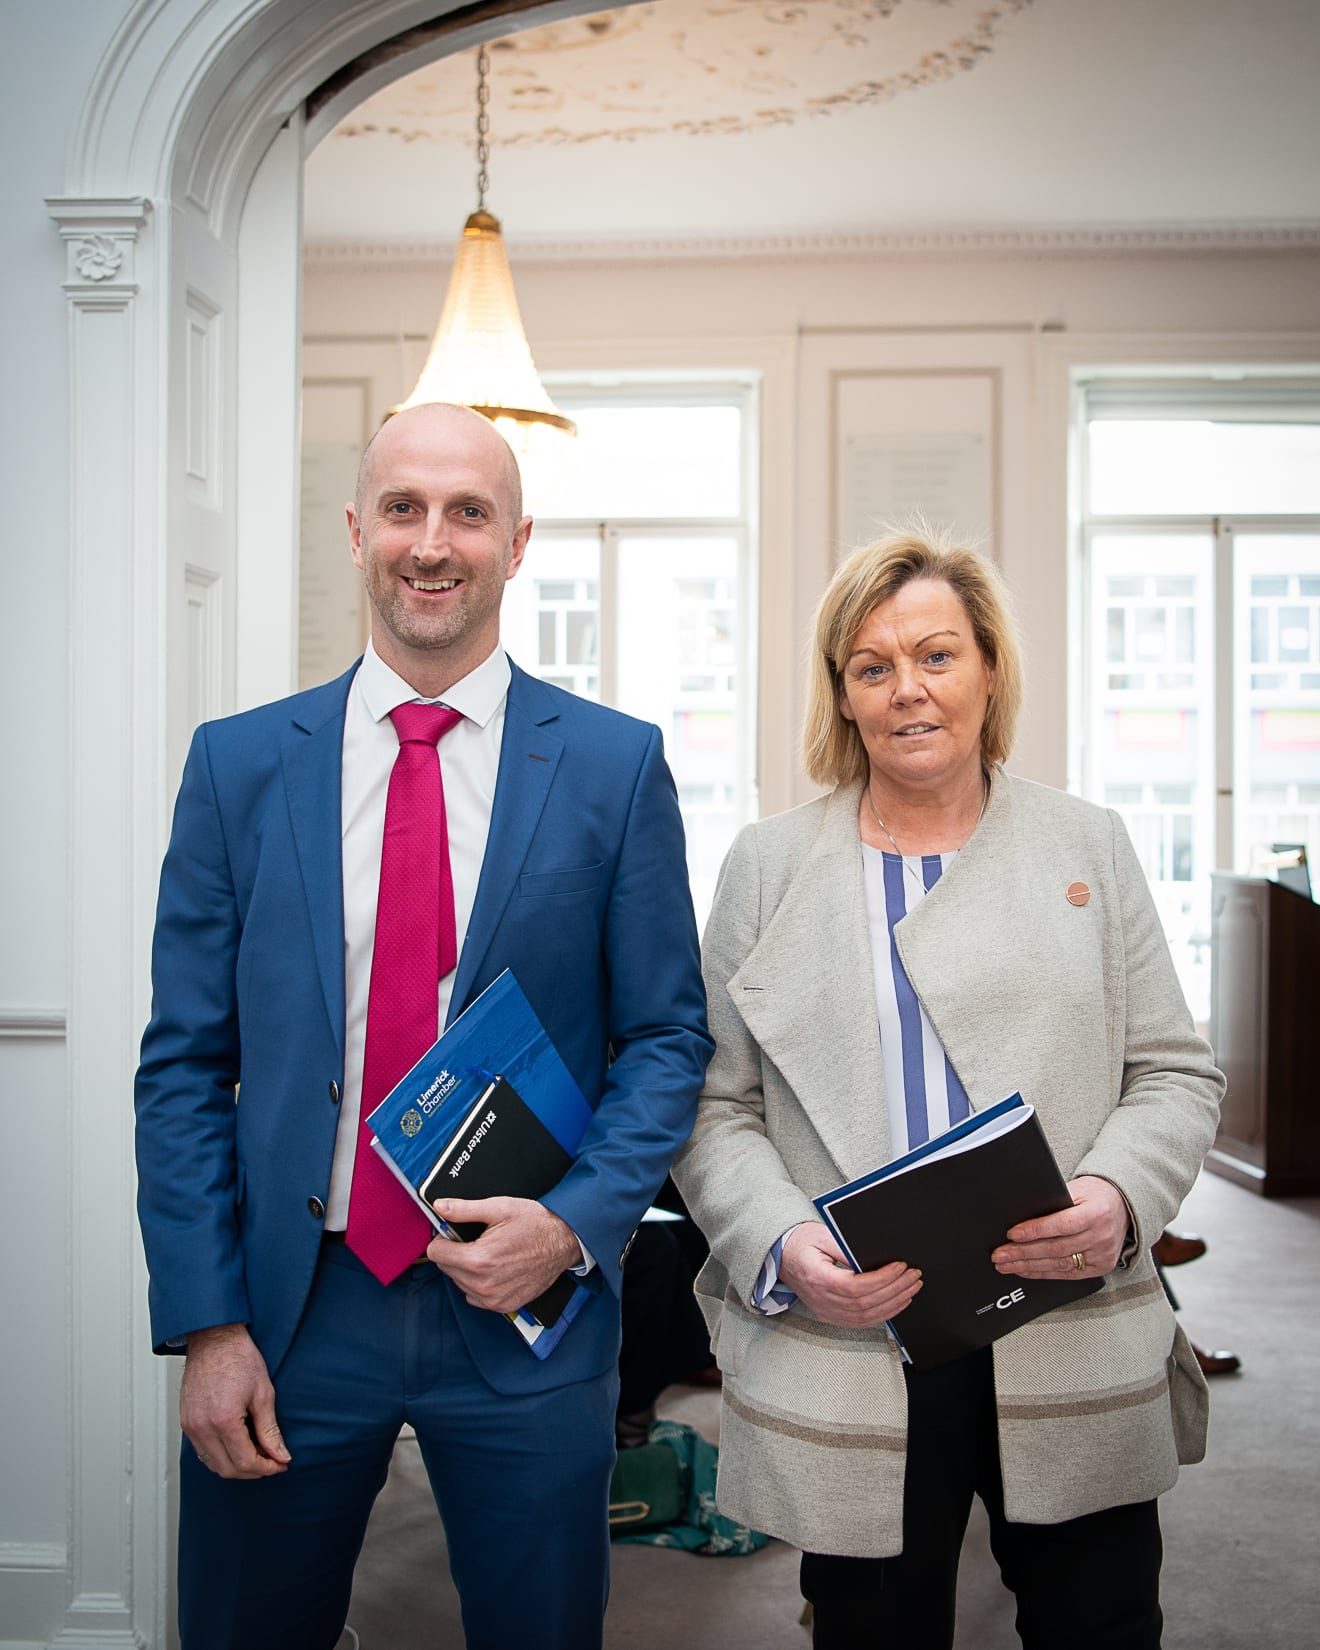 No repro fee-Aviation Impact Report Members Briefing which was held in the Limerick Chamber Boardroom on Tuesday 05th November  - From Left to Right: Cian McInerney and Monica Mullins both from Ulster Bank. 
Photo credit Shauna Kennedy